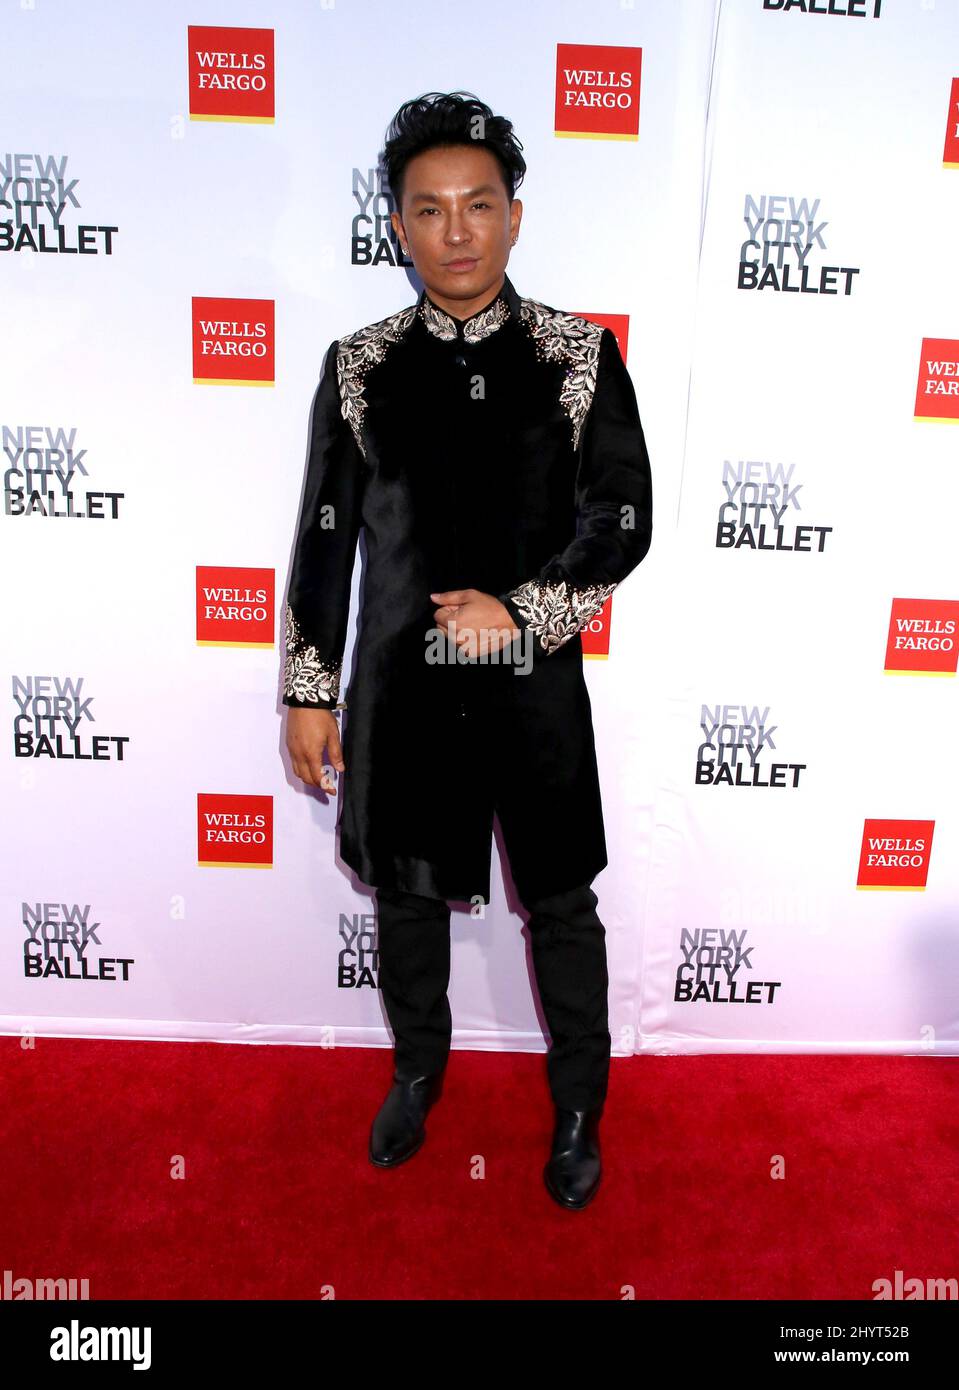 Prabal Gurung attending the New York City Ballet 2021 Fall Fashion Gala held at the David H. Koch Theater at Lincoln Center on September 30, 2021 in New York City, NY Stock Photo